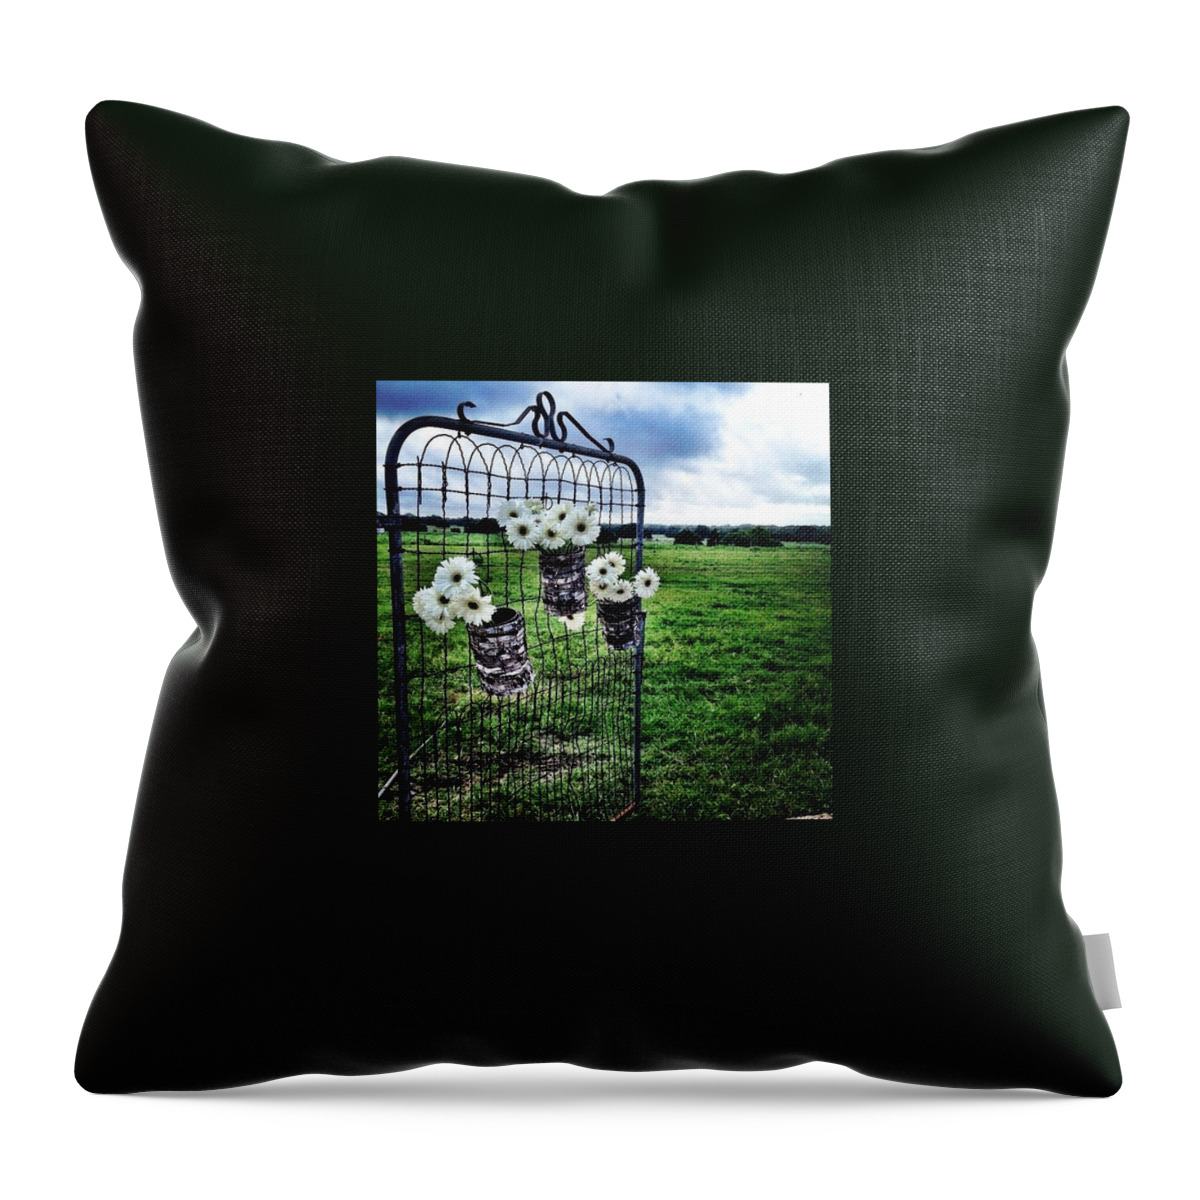 Ranch Throw Pillow featuring the photograph Her Wedding Day by Madison Dragna